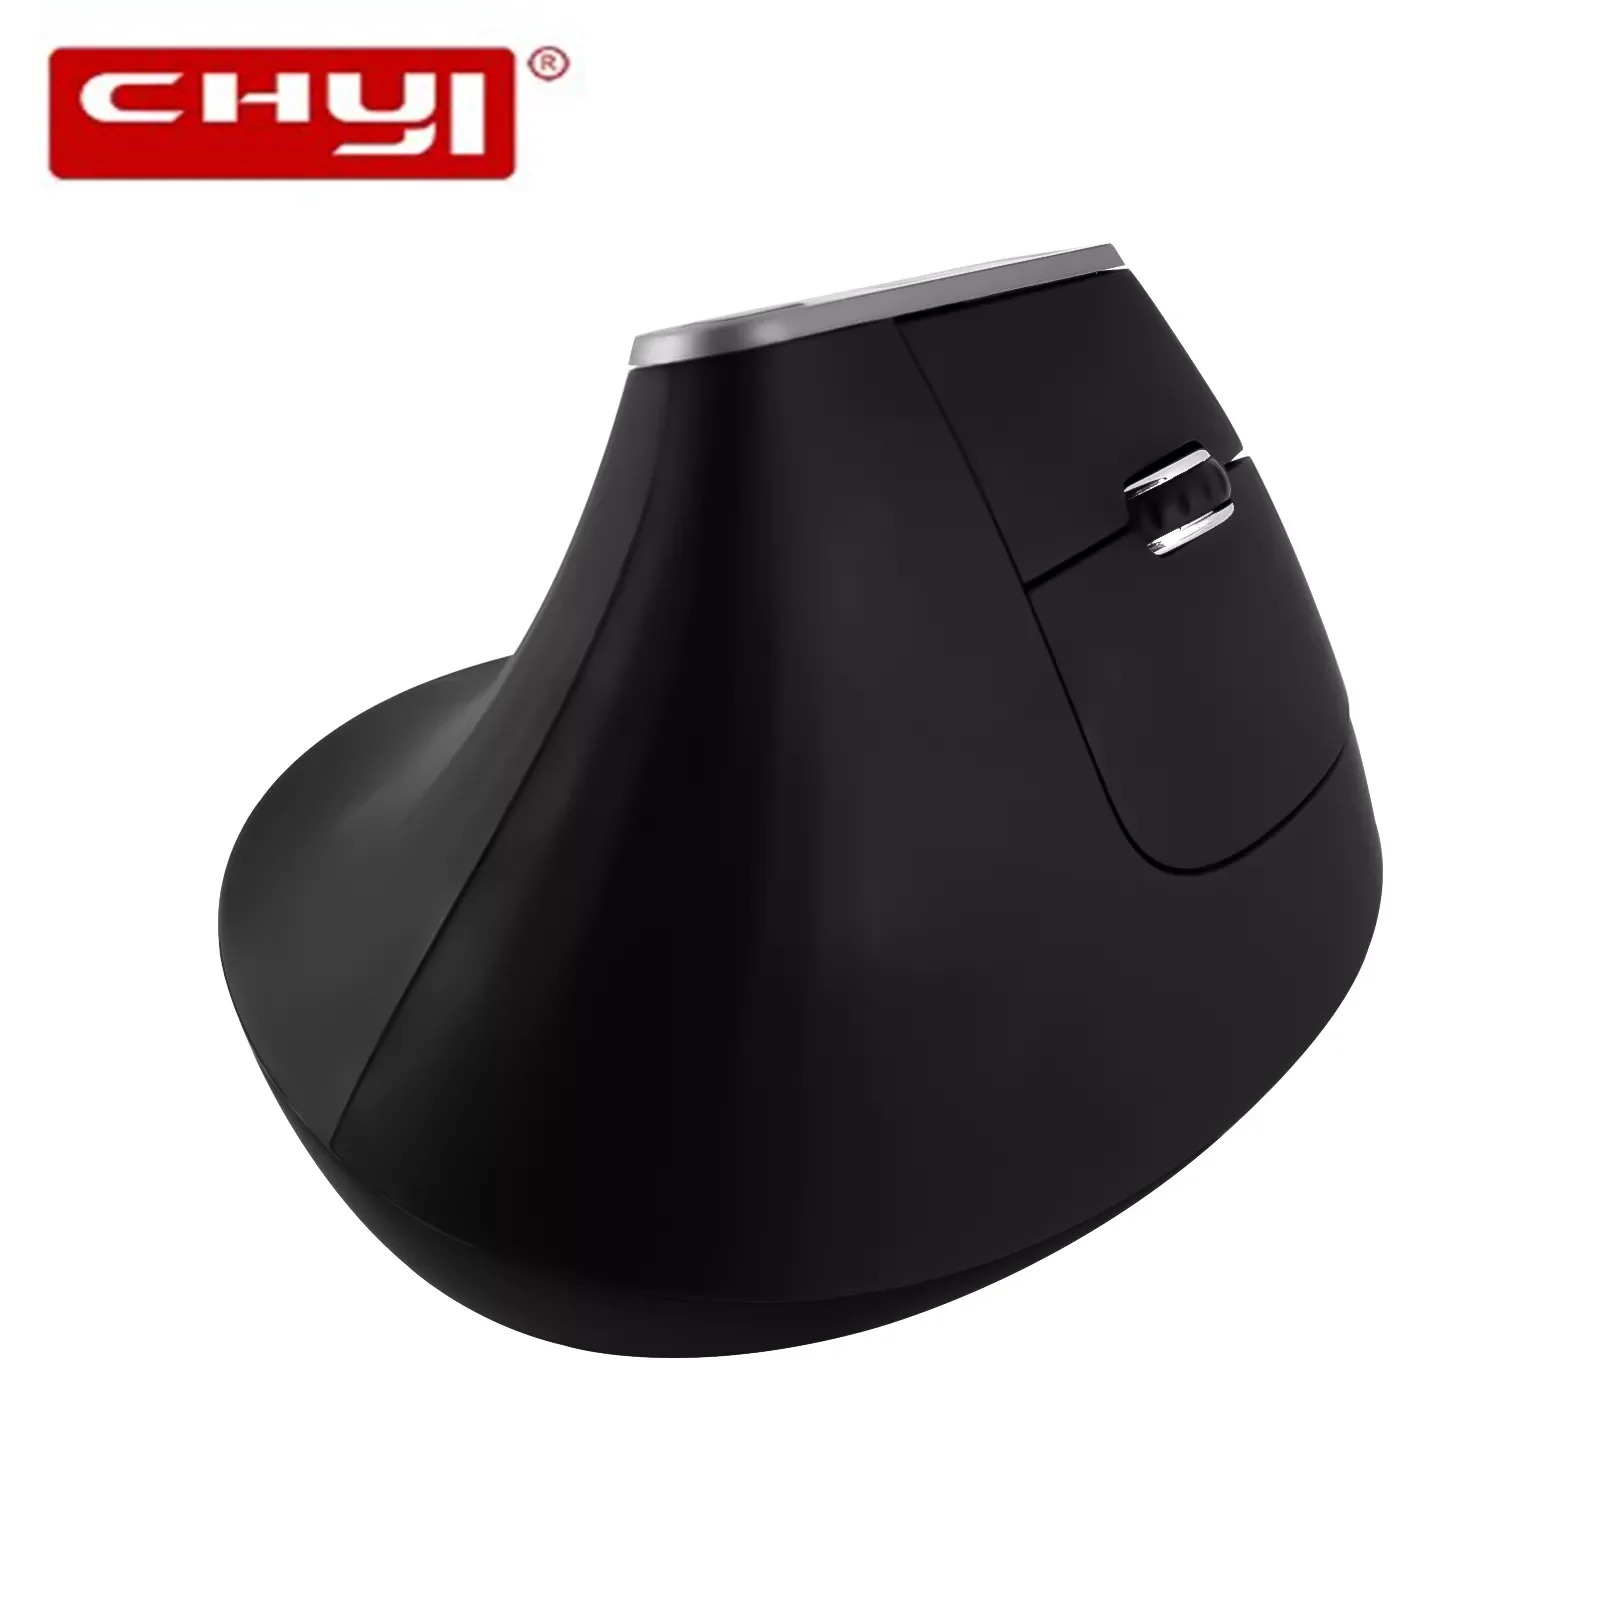 

CHYI 2.4Ghz Wireless Mouse Ergonomic Vertical Mouse 1600 DPI Optical USB Mouse Gamer Colorful Light Office Mice For Laptop PC